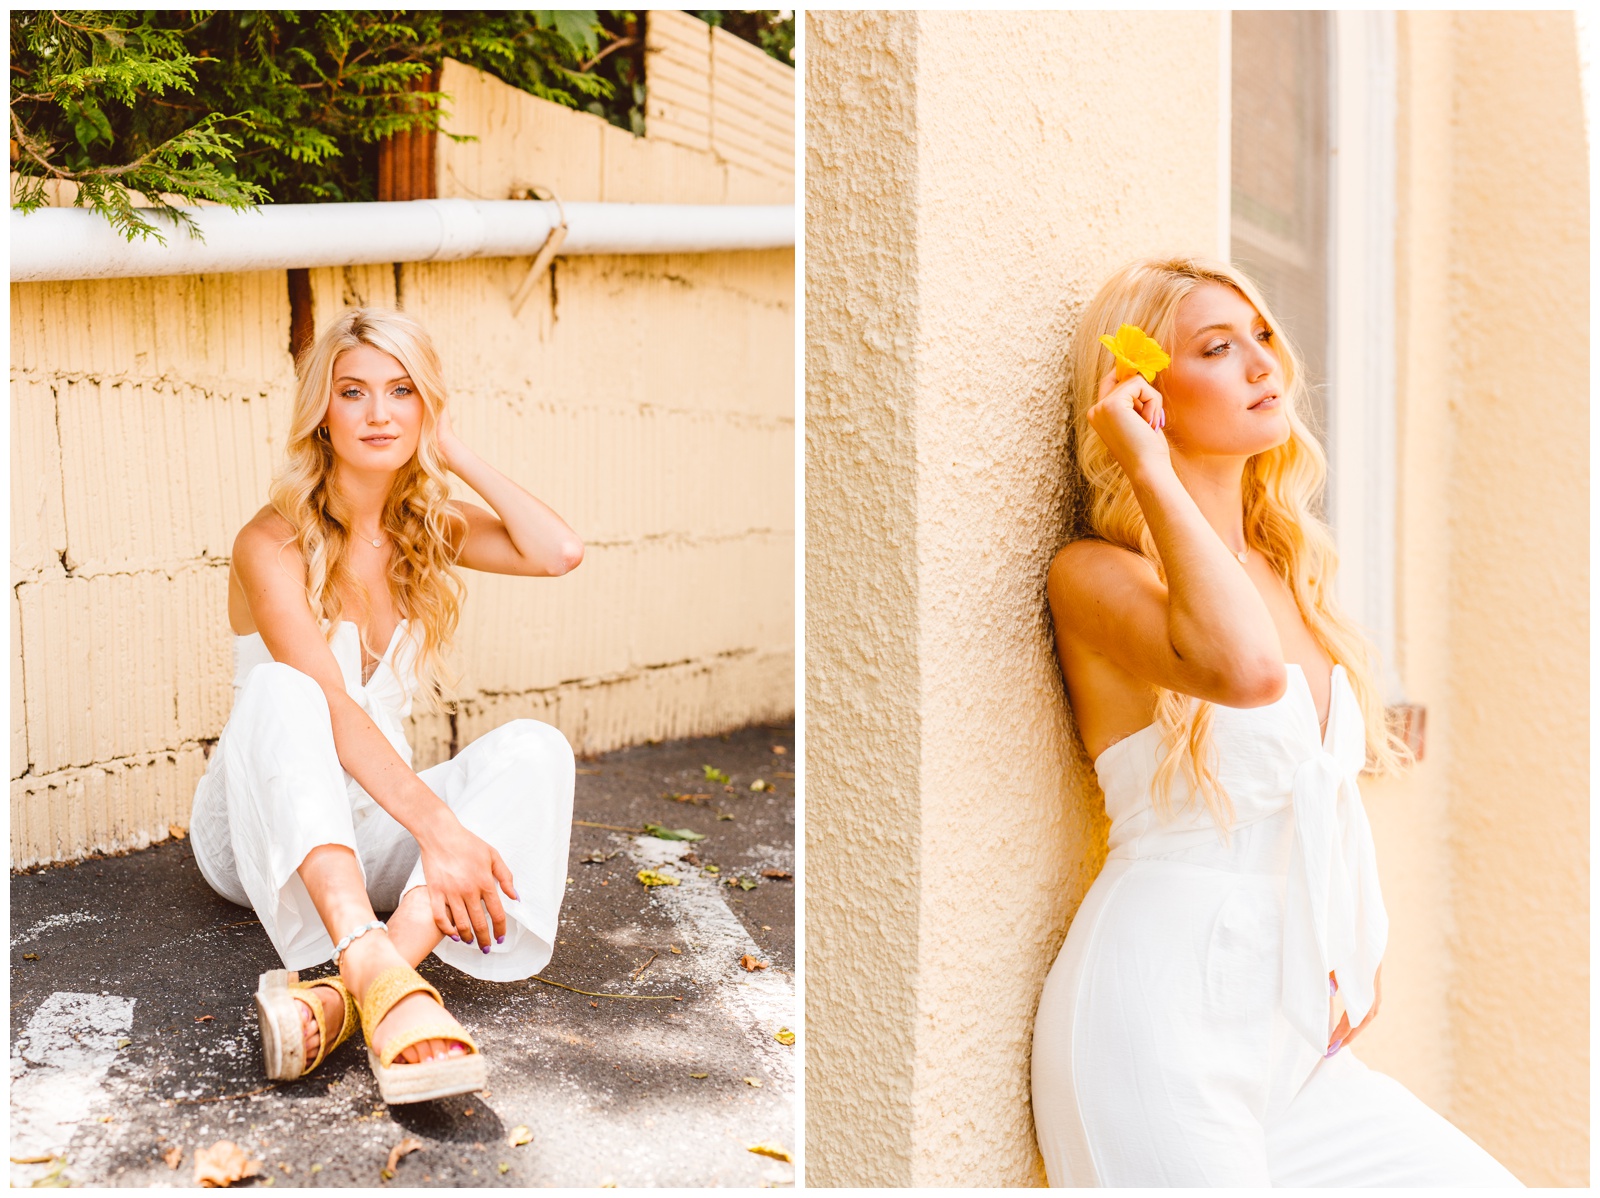 Modern & Colorful Senior Session - Downtown Annapolis Maryland - Brooke Michelle Photo